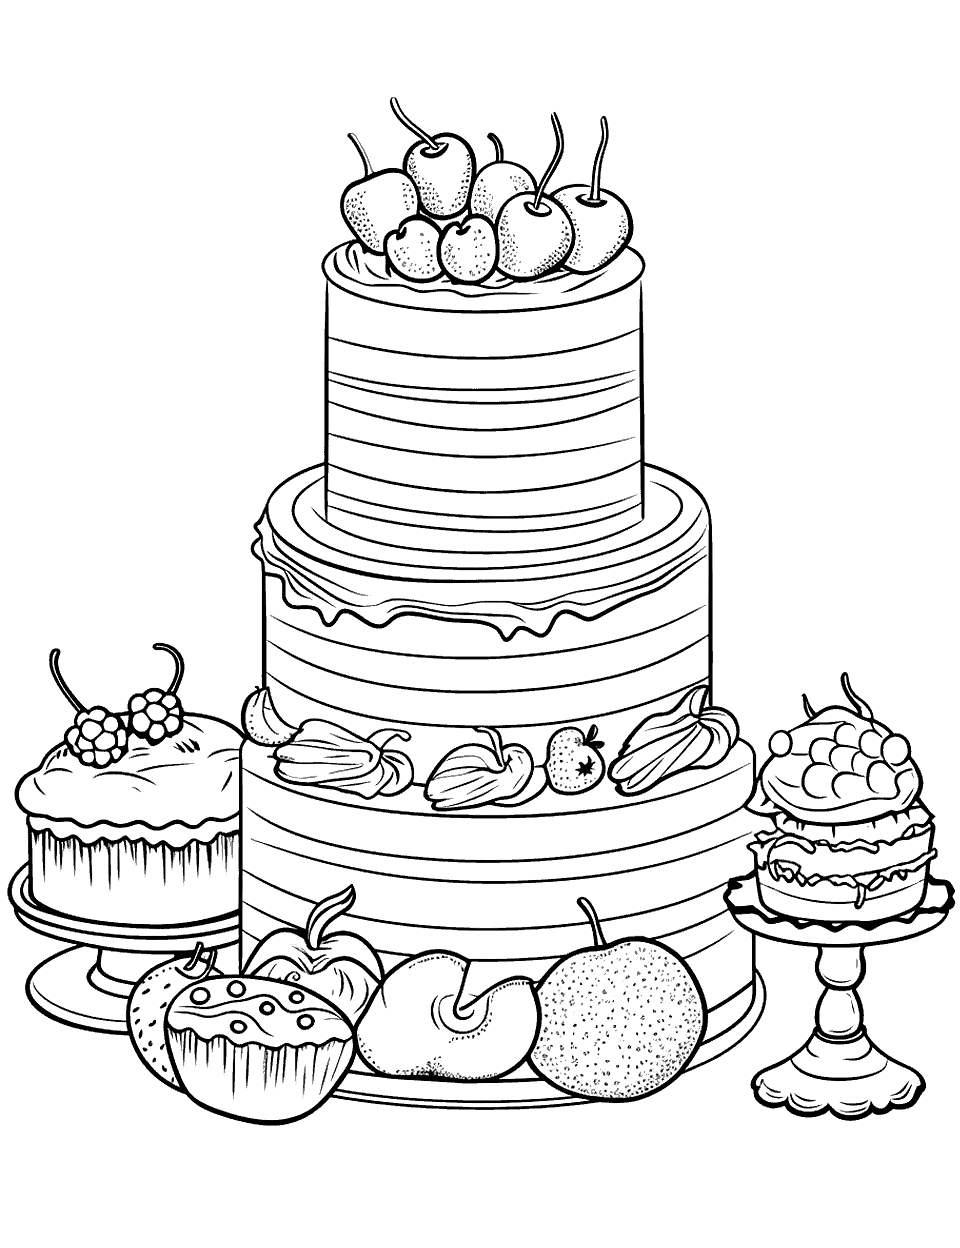 Dessert Fiesta Cake Coloring Page - A table filled with various types of desserts including a prominent cake.